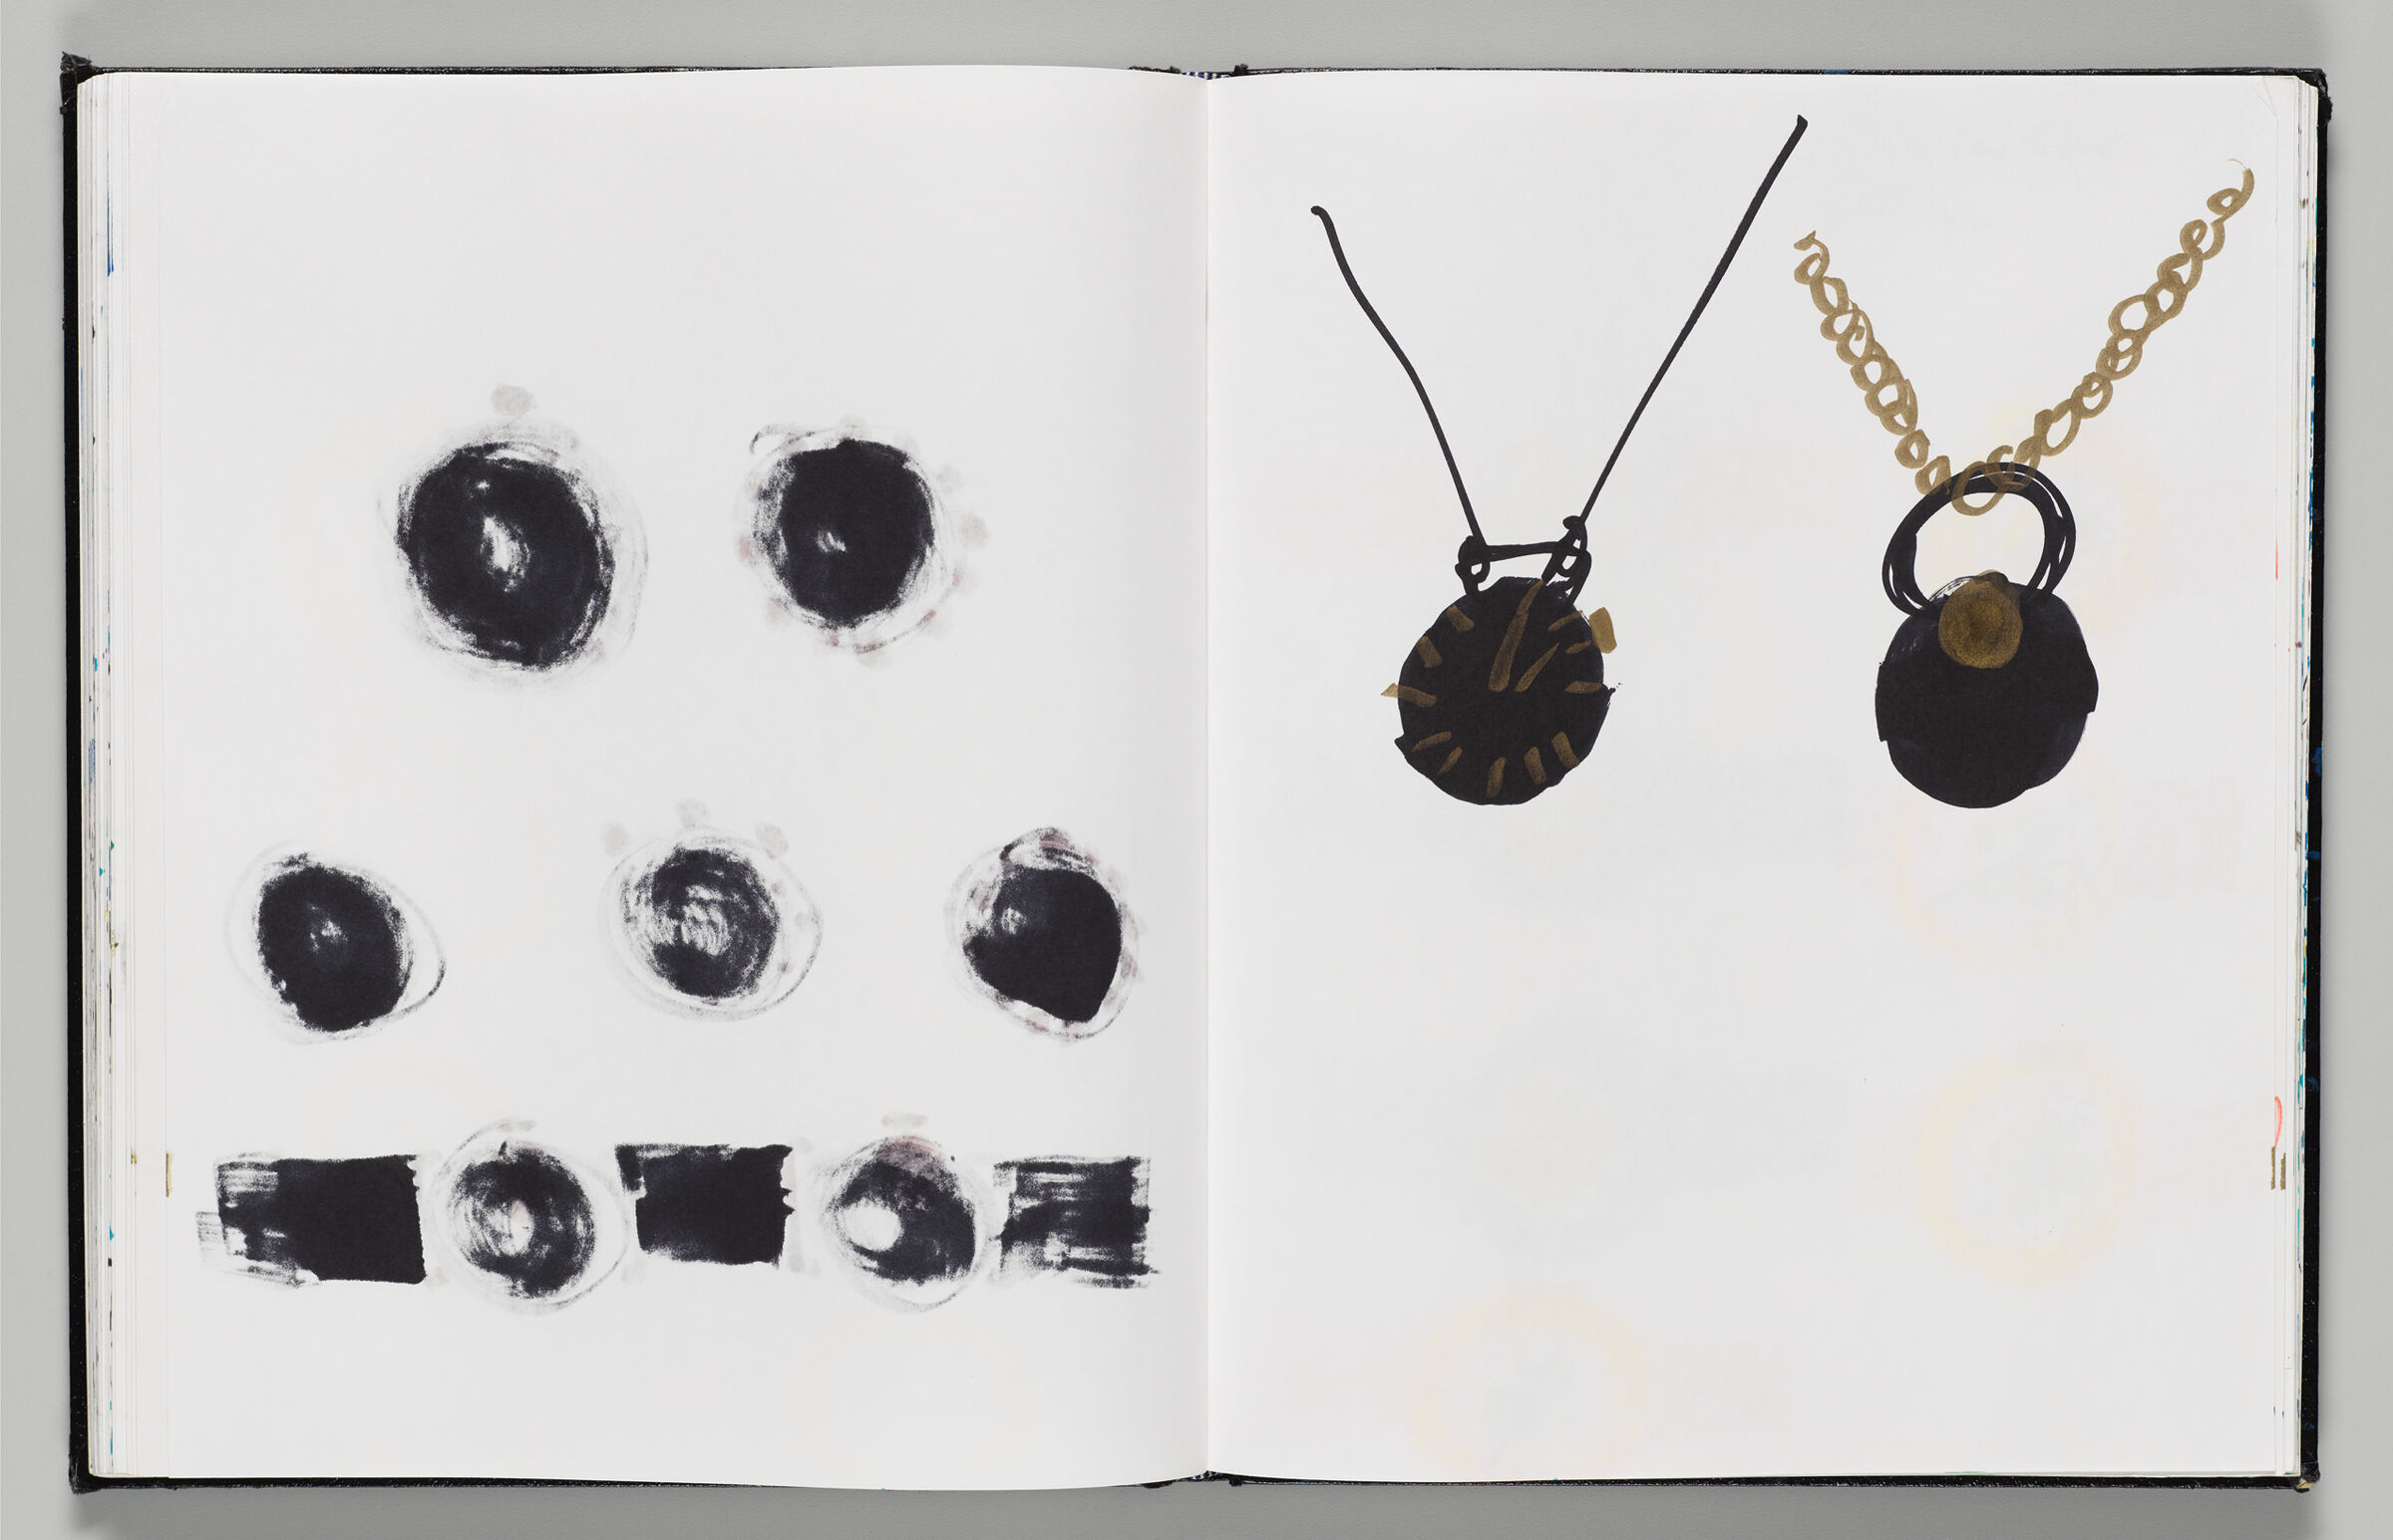 Untitled (Bleed-Through Of Previous Page, Left Page); Untitled (Watch Designs, Right Page)